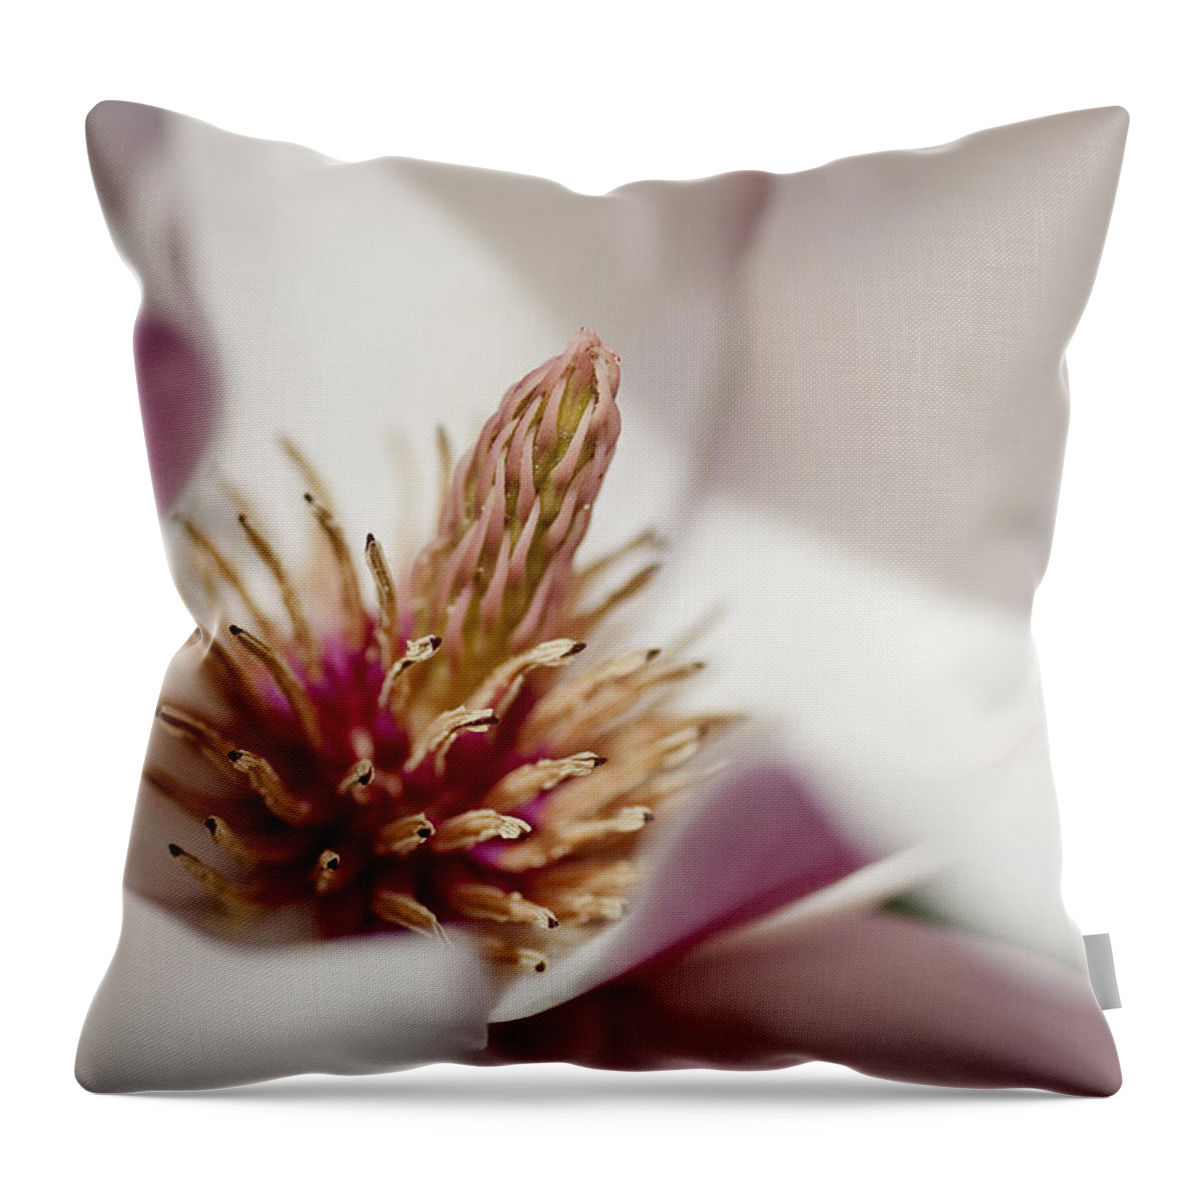 Arboretum Throw Pillow featuring the photograph Magnolia by Steven Ralser